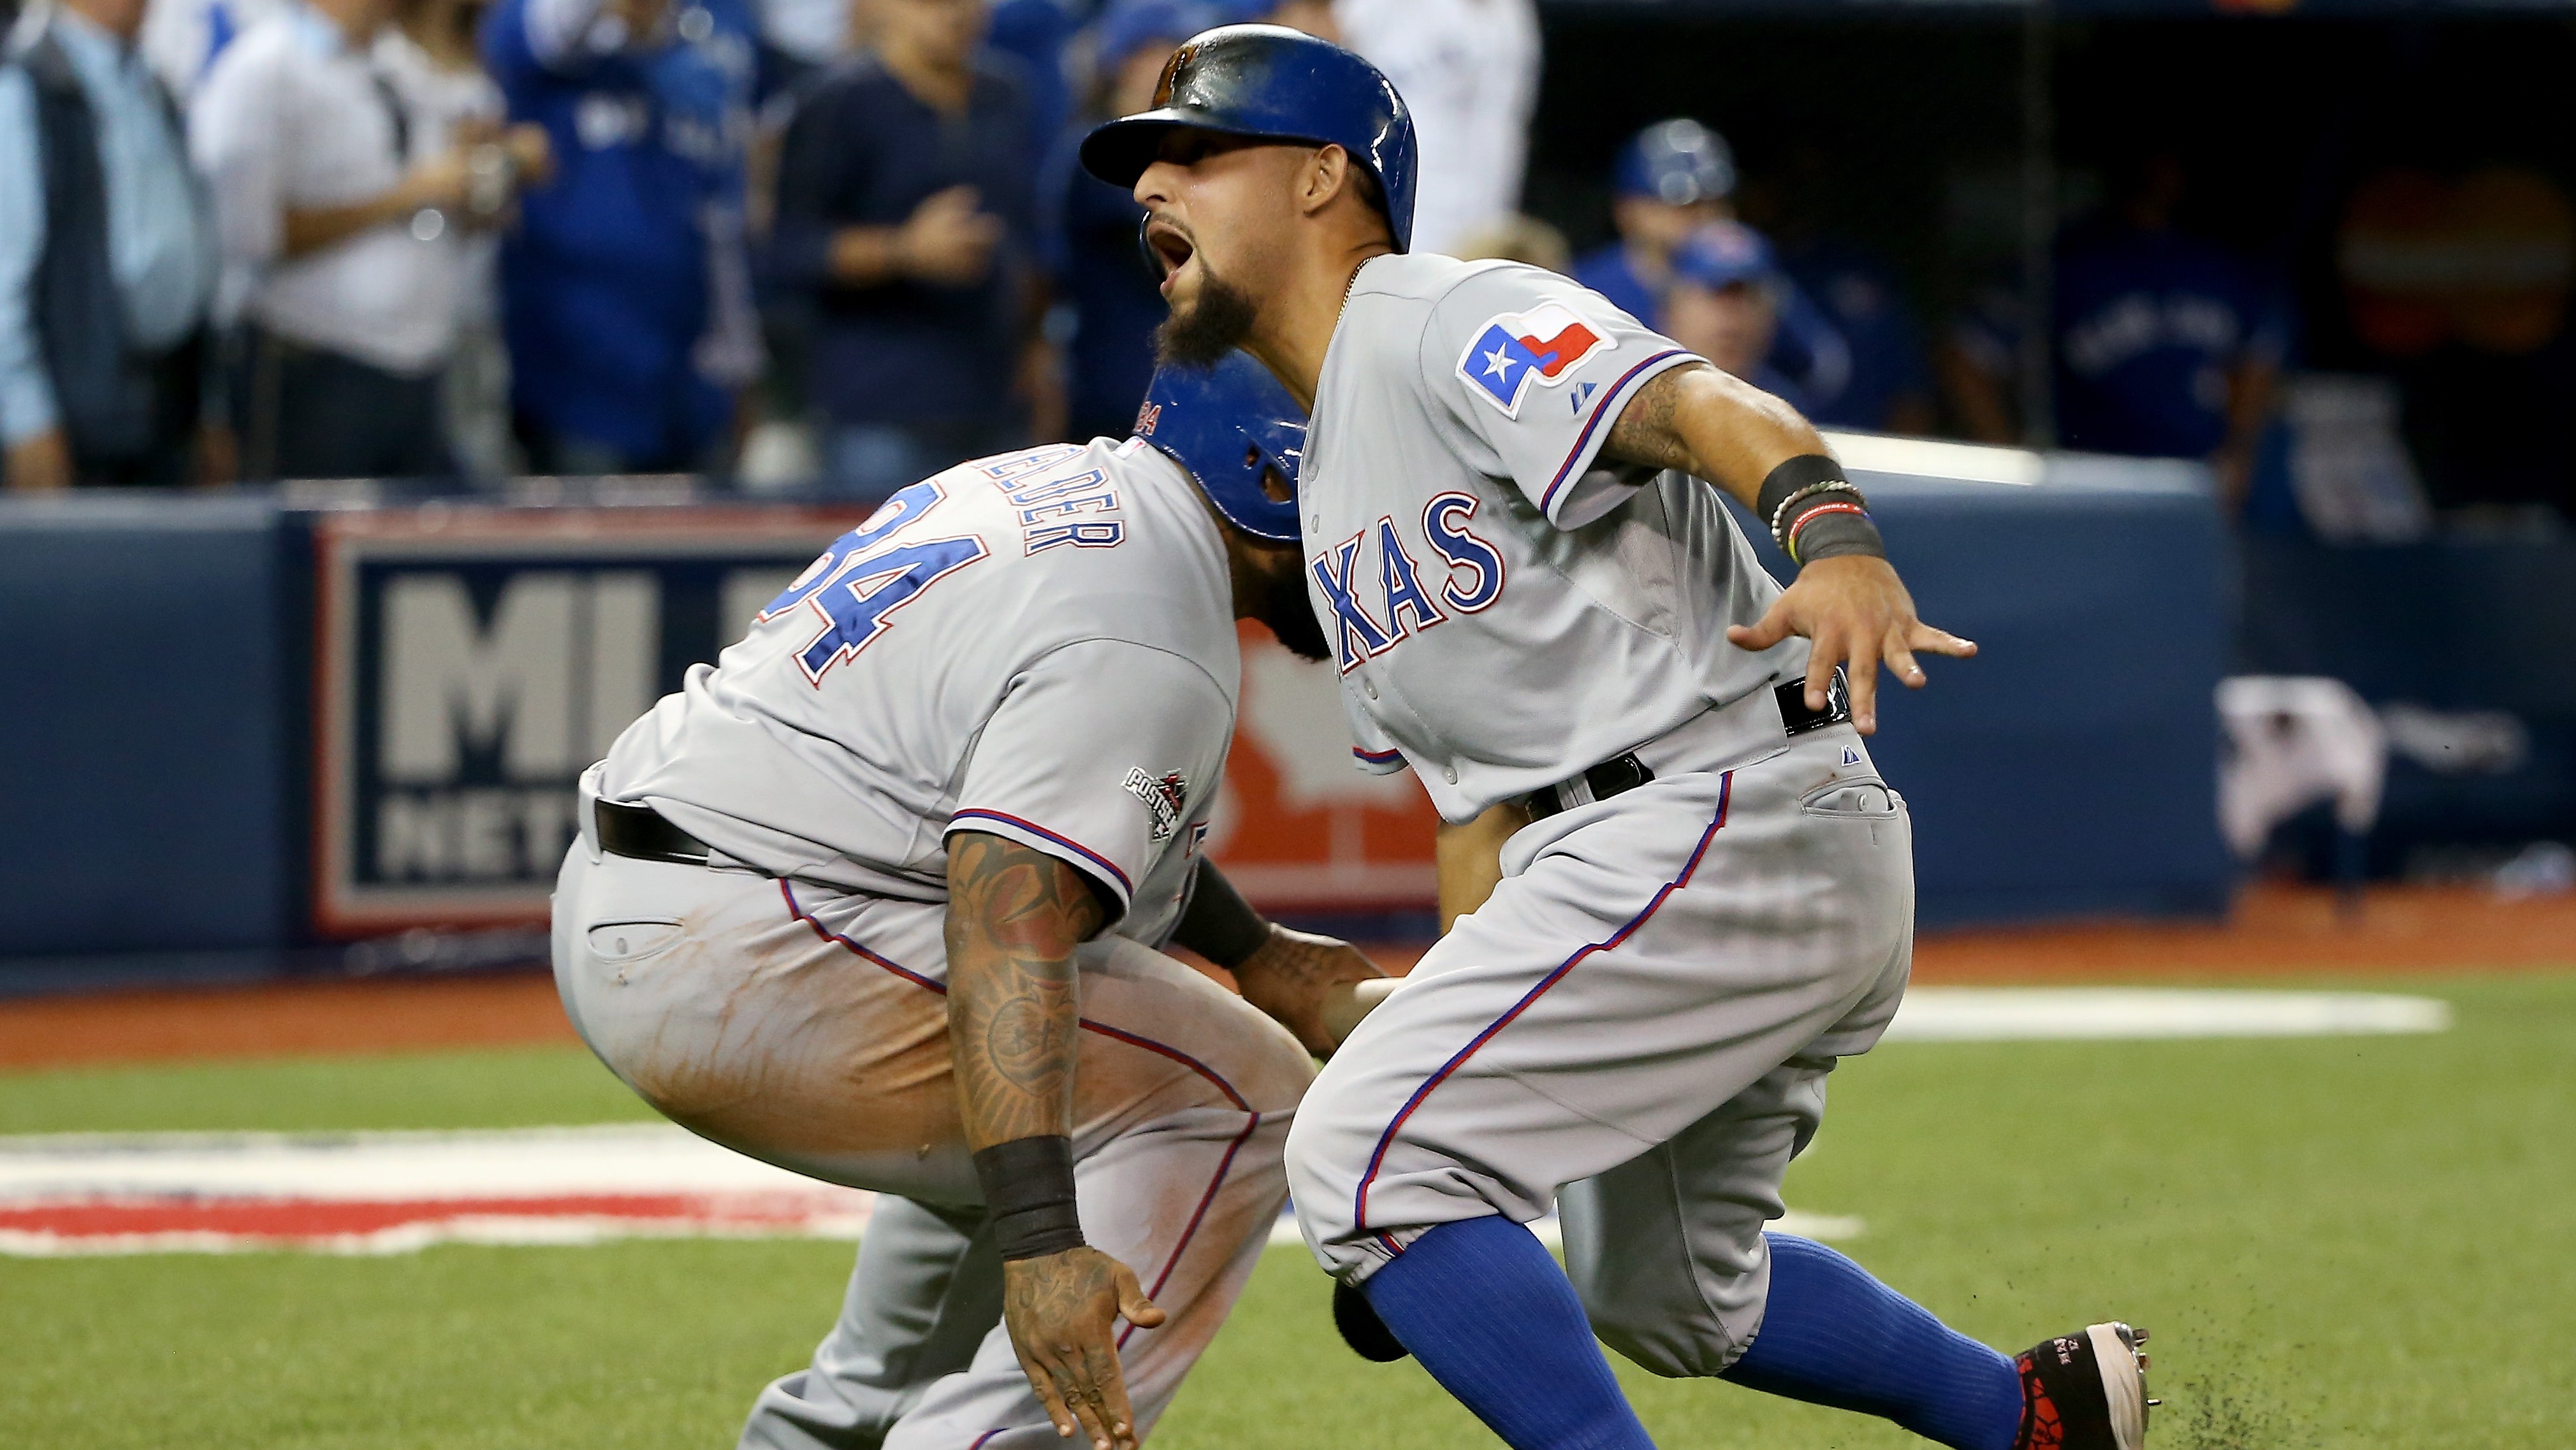 Rougned Odor out with sore knee - Lone Star Ball